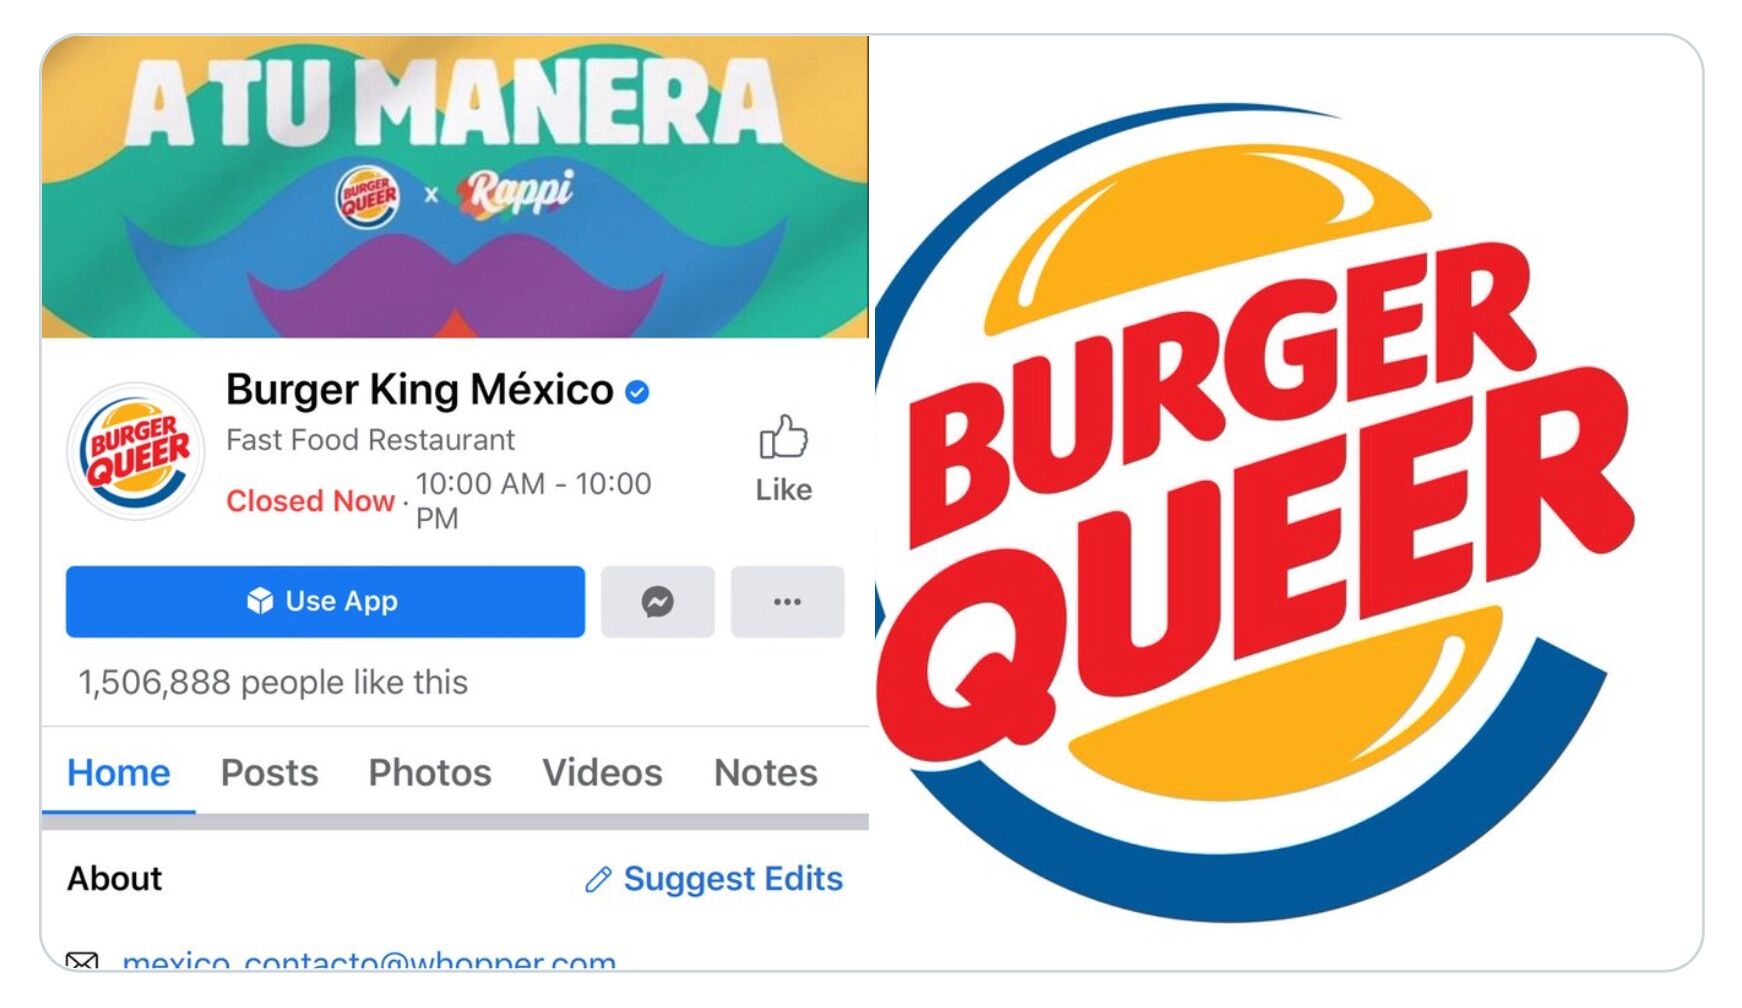 Burger King Mexico changed their logo to "honor" Pride month